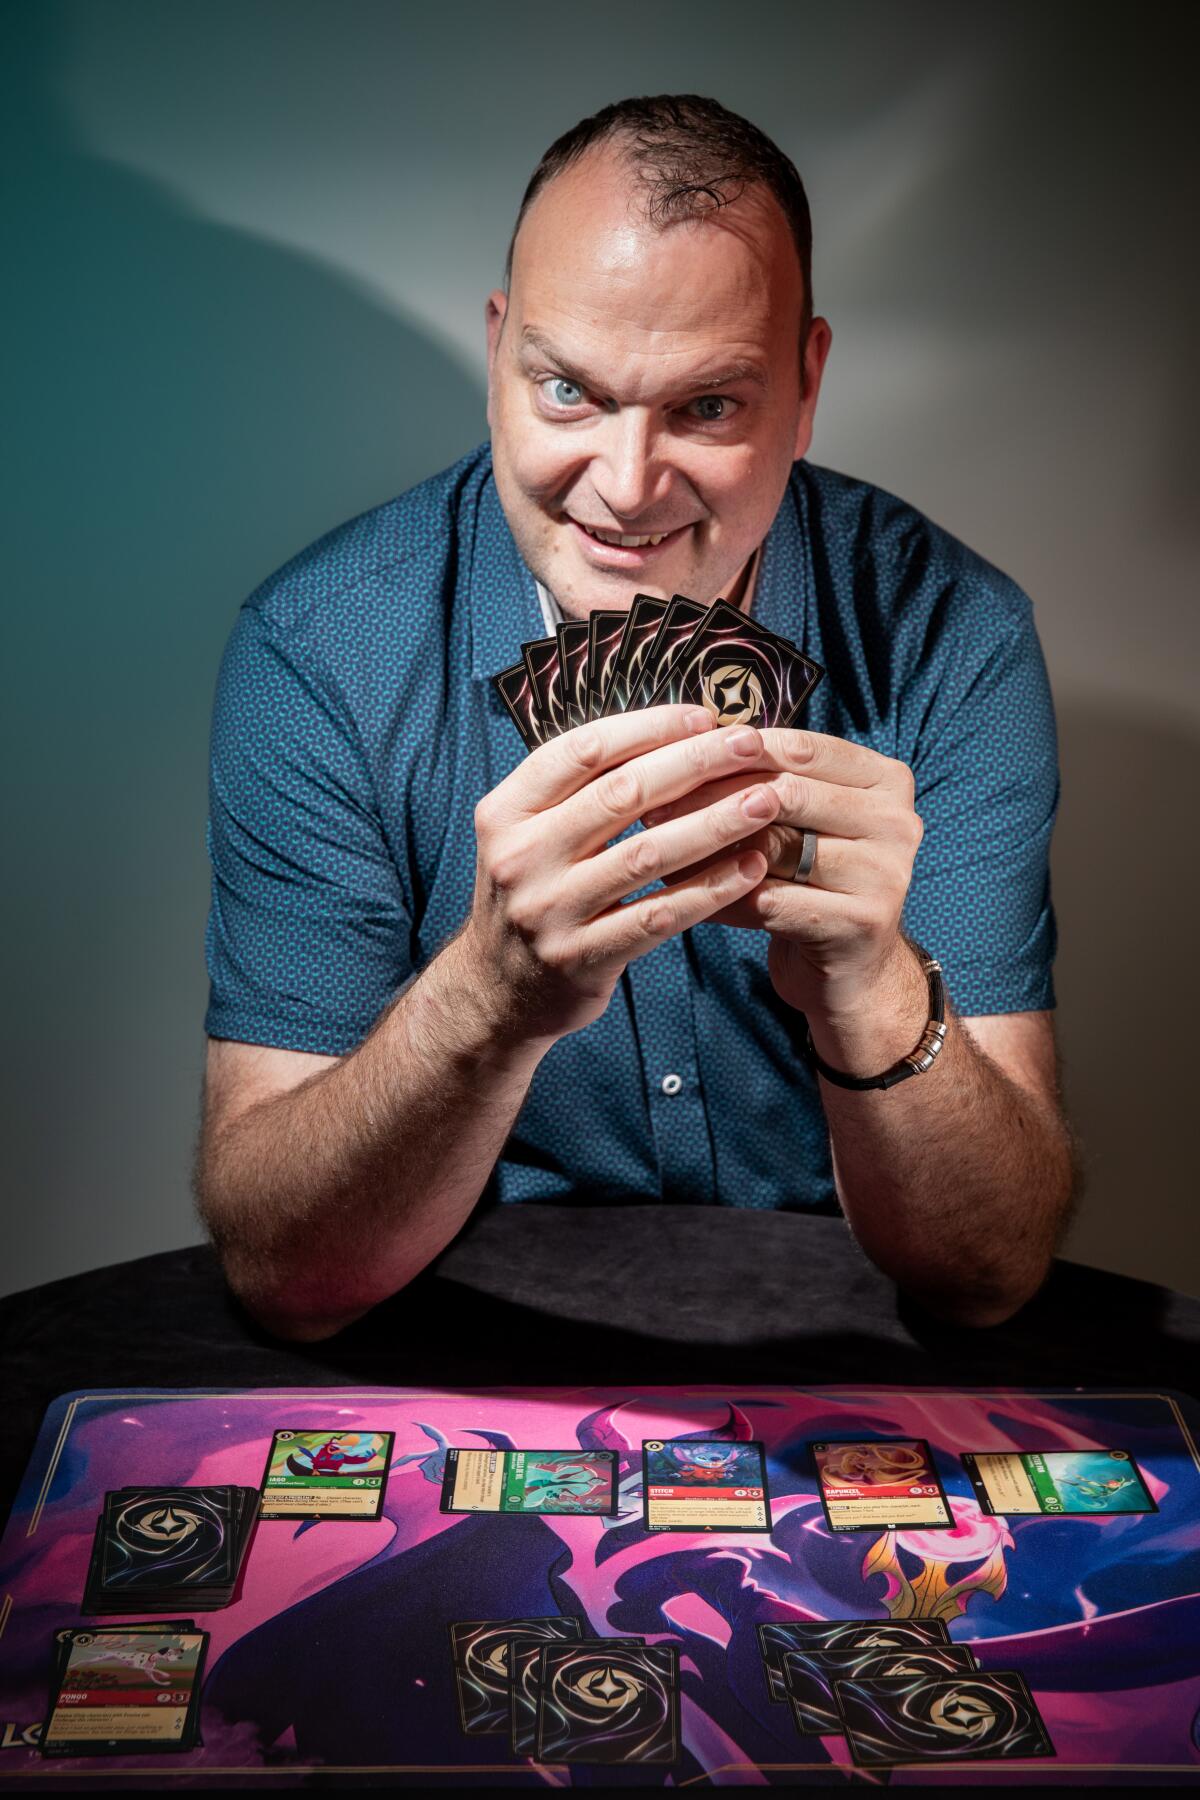 A man holds trading cards fanned out in his hands at a table spread with more cards